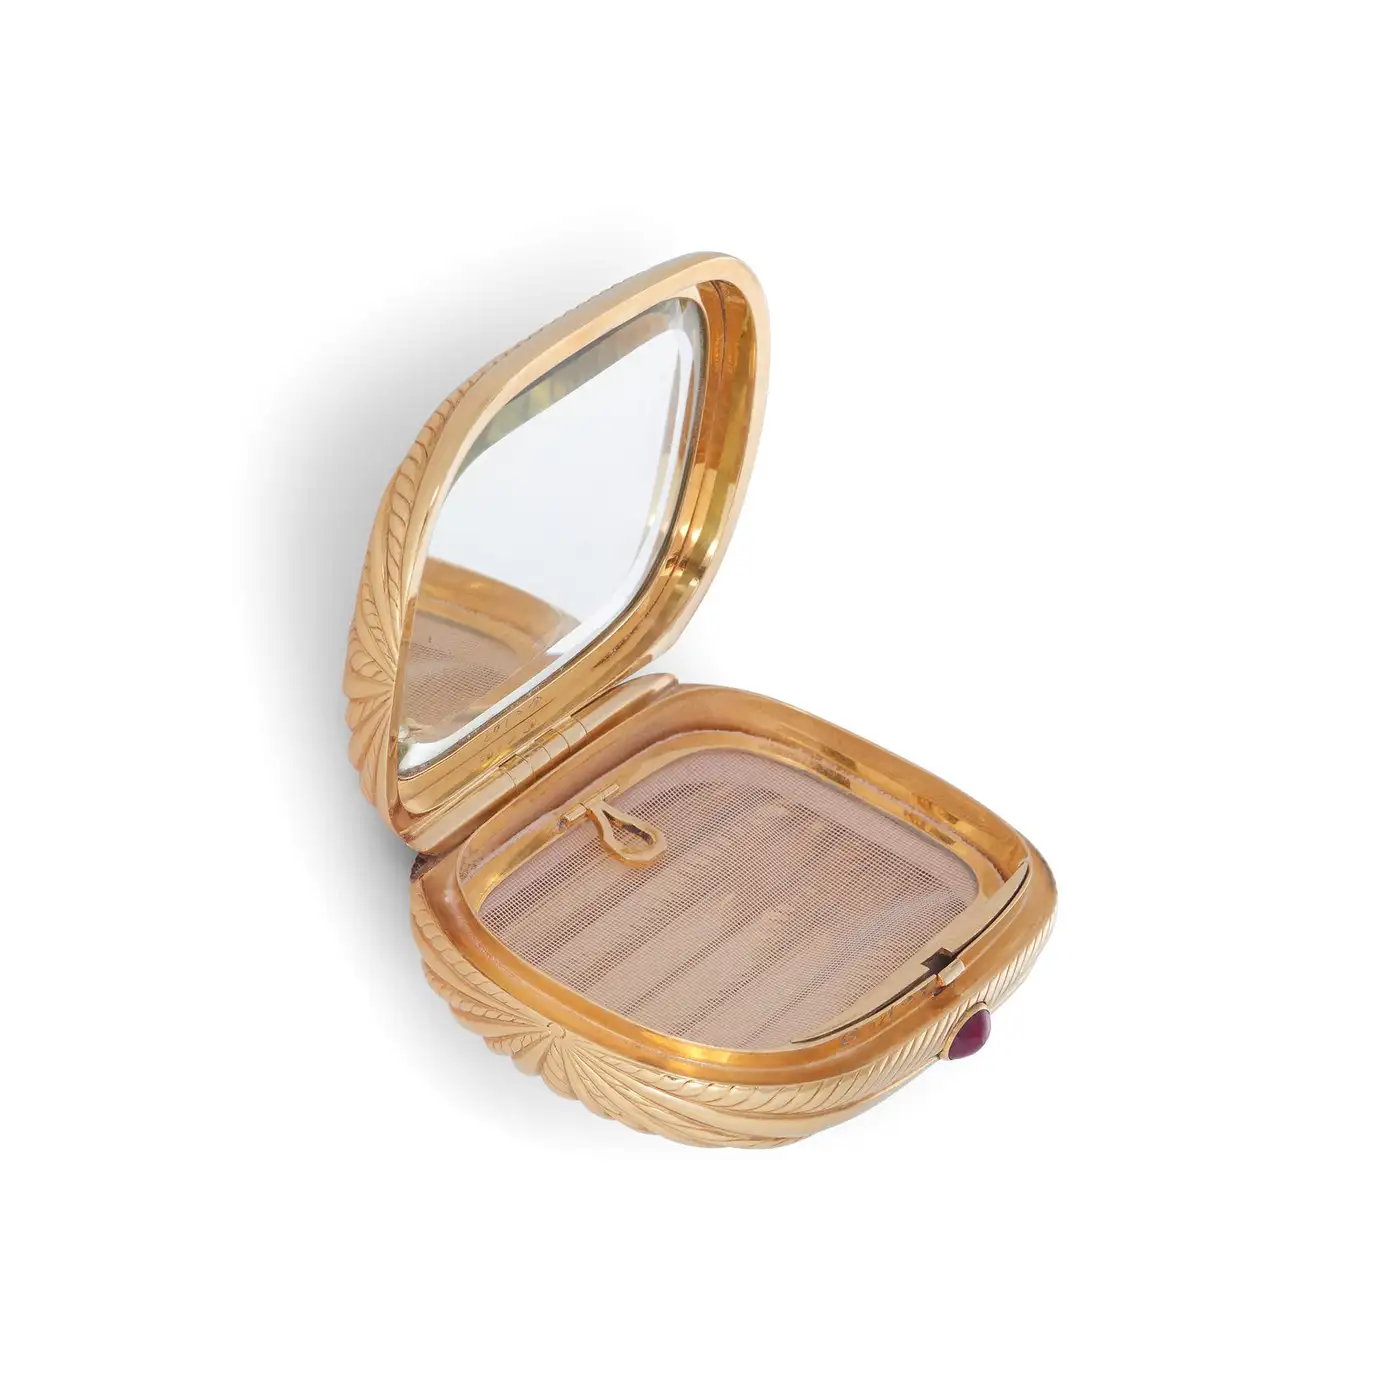 Bvlgari-Gold-and-Ruby-Compact-Case-Circa-1960s-6.webp